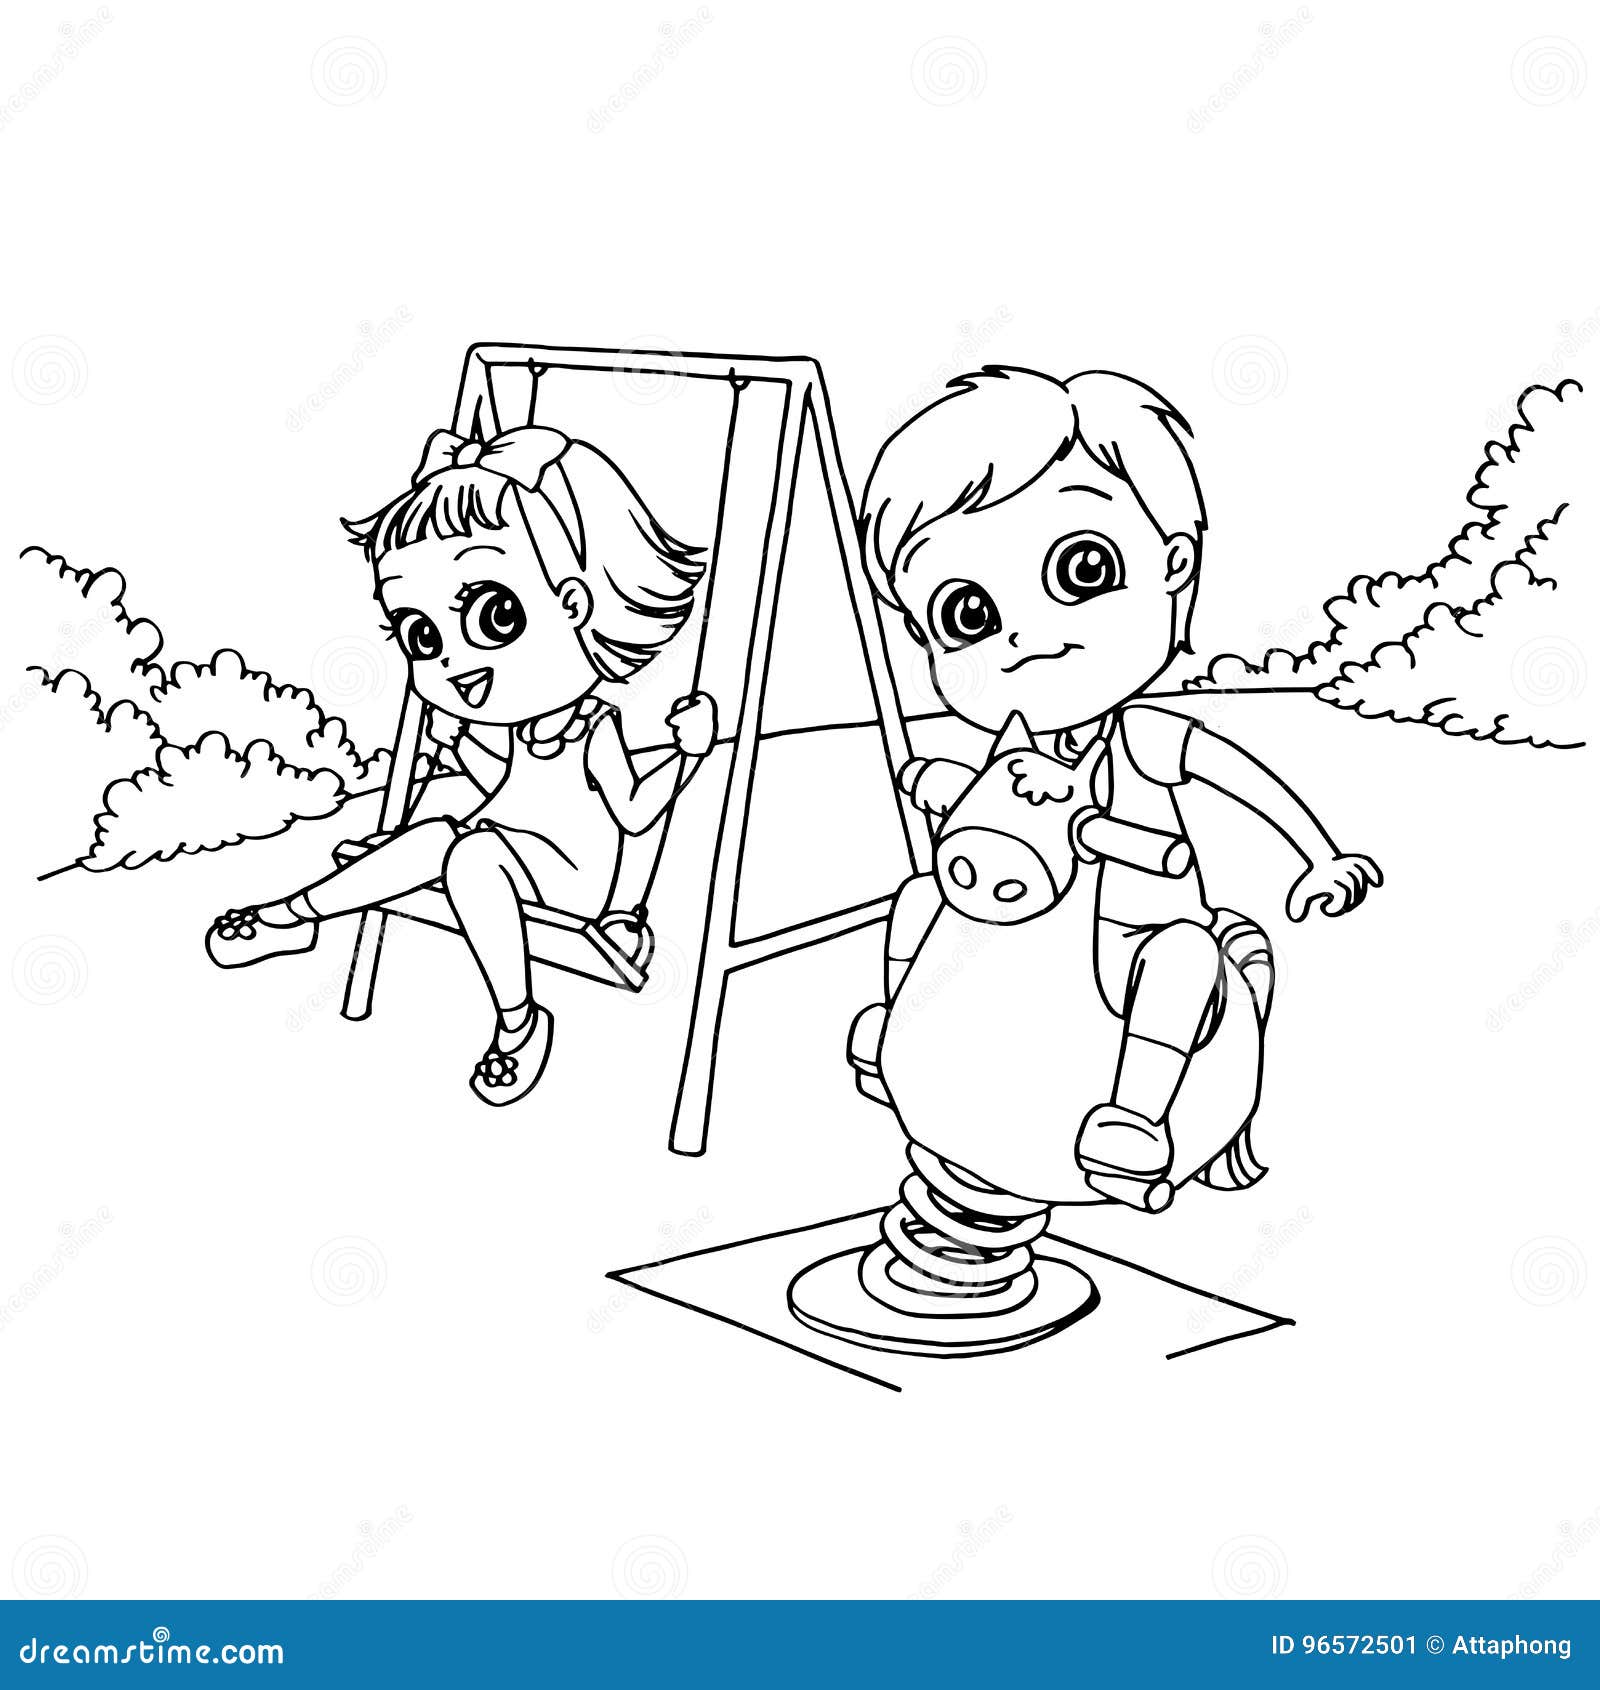 Kids At The Playground Cartoon Coloring Page Vector Stock Vector Illustration Of Girls Coloring 96572501